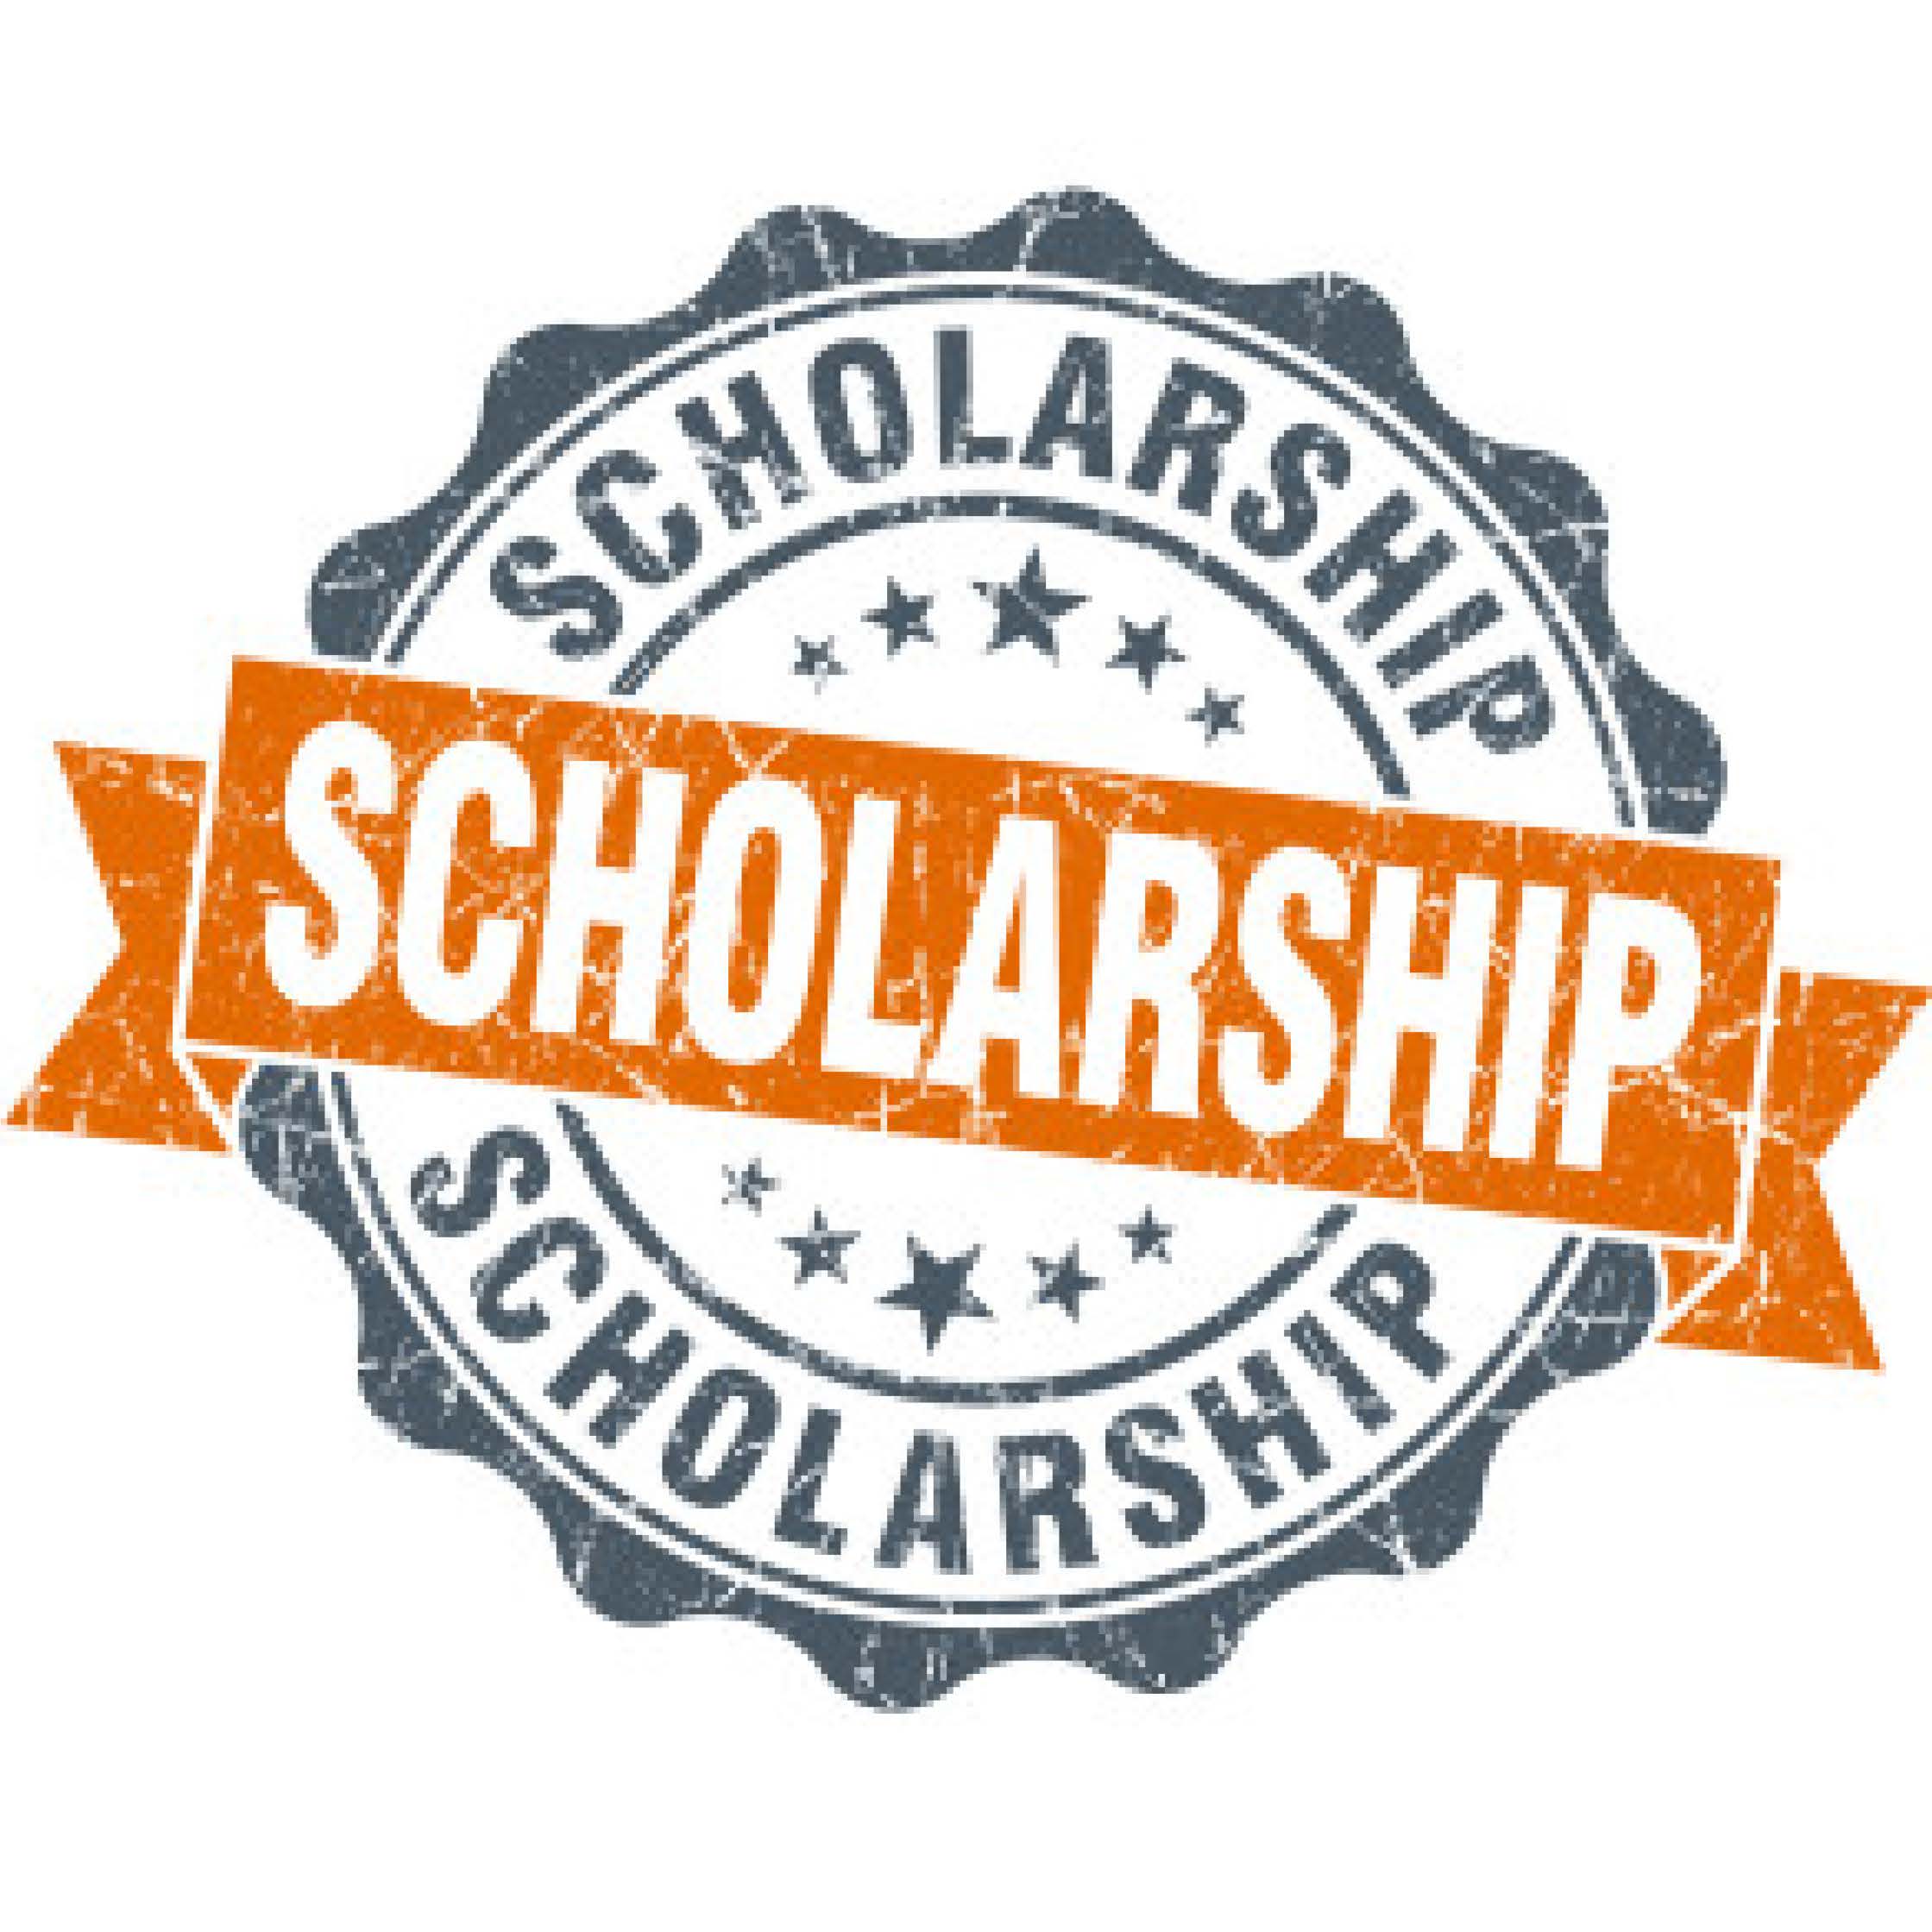 Scholarship opportunities abound for high schoolers, don’t miss out